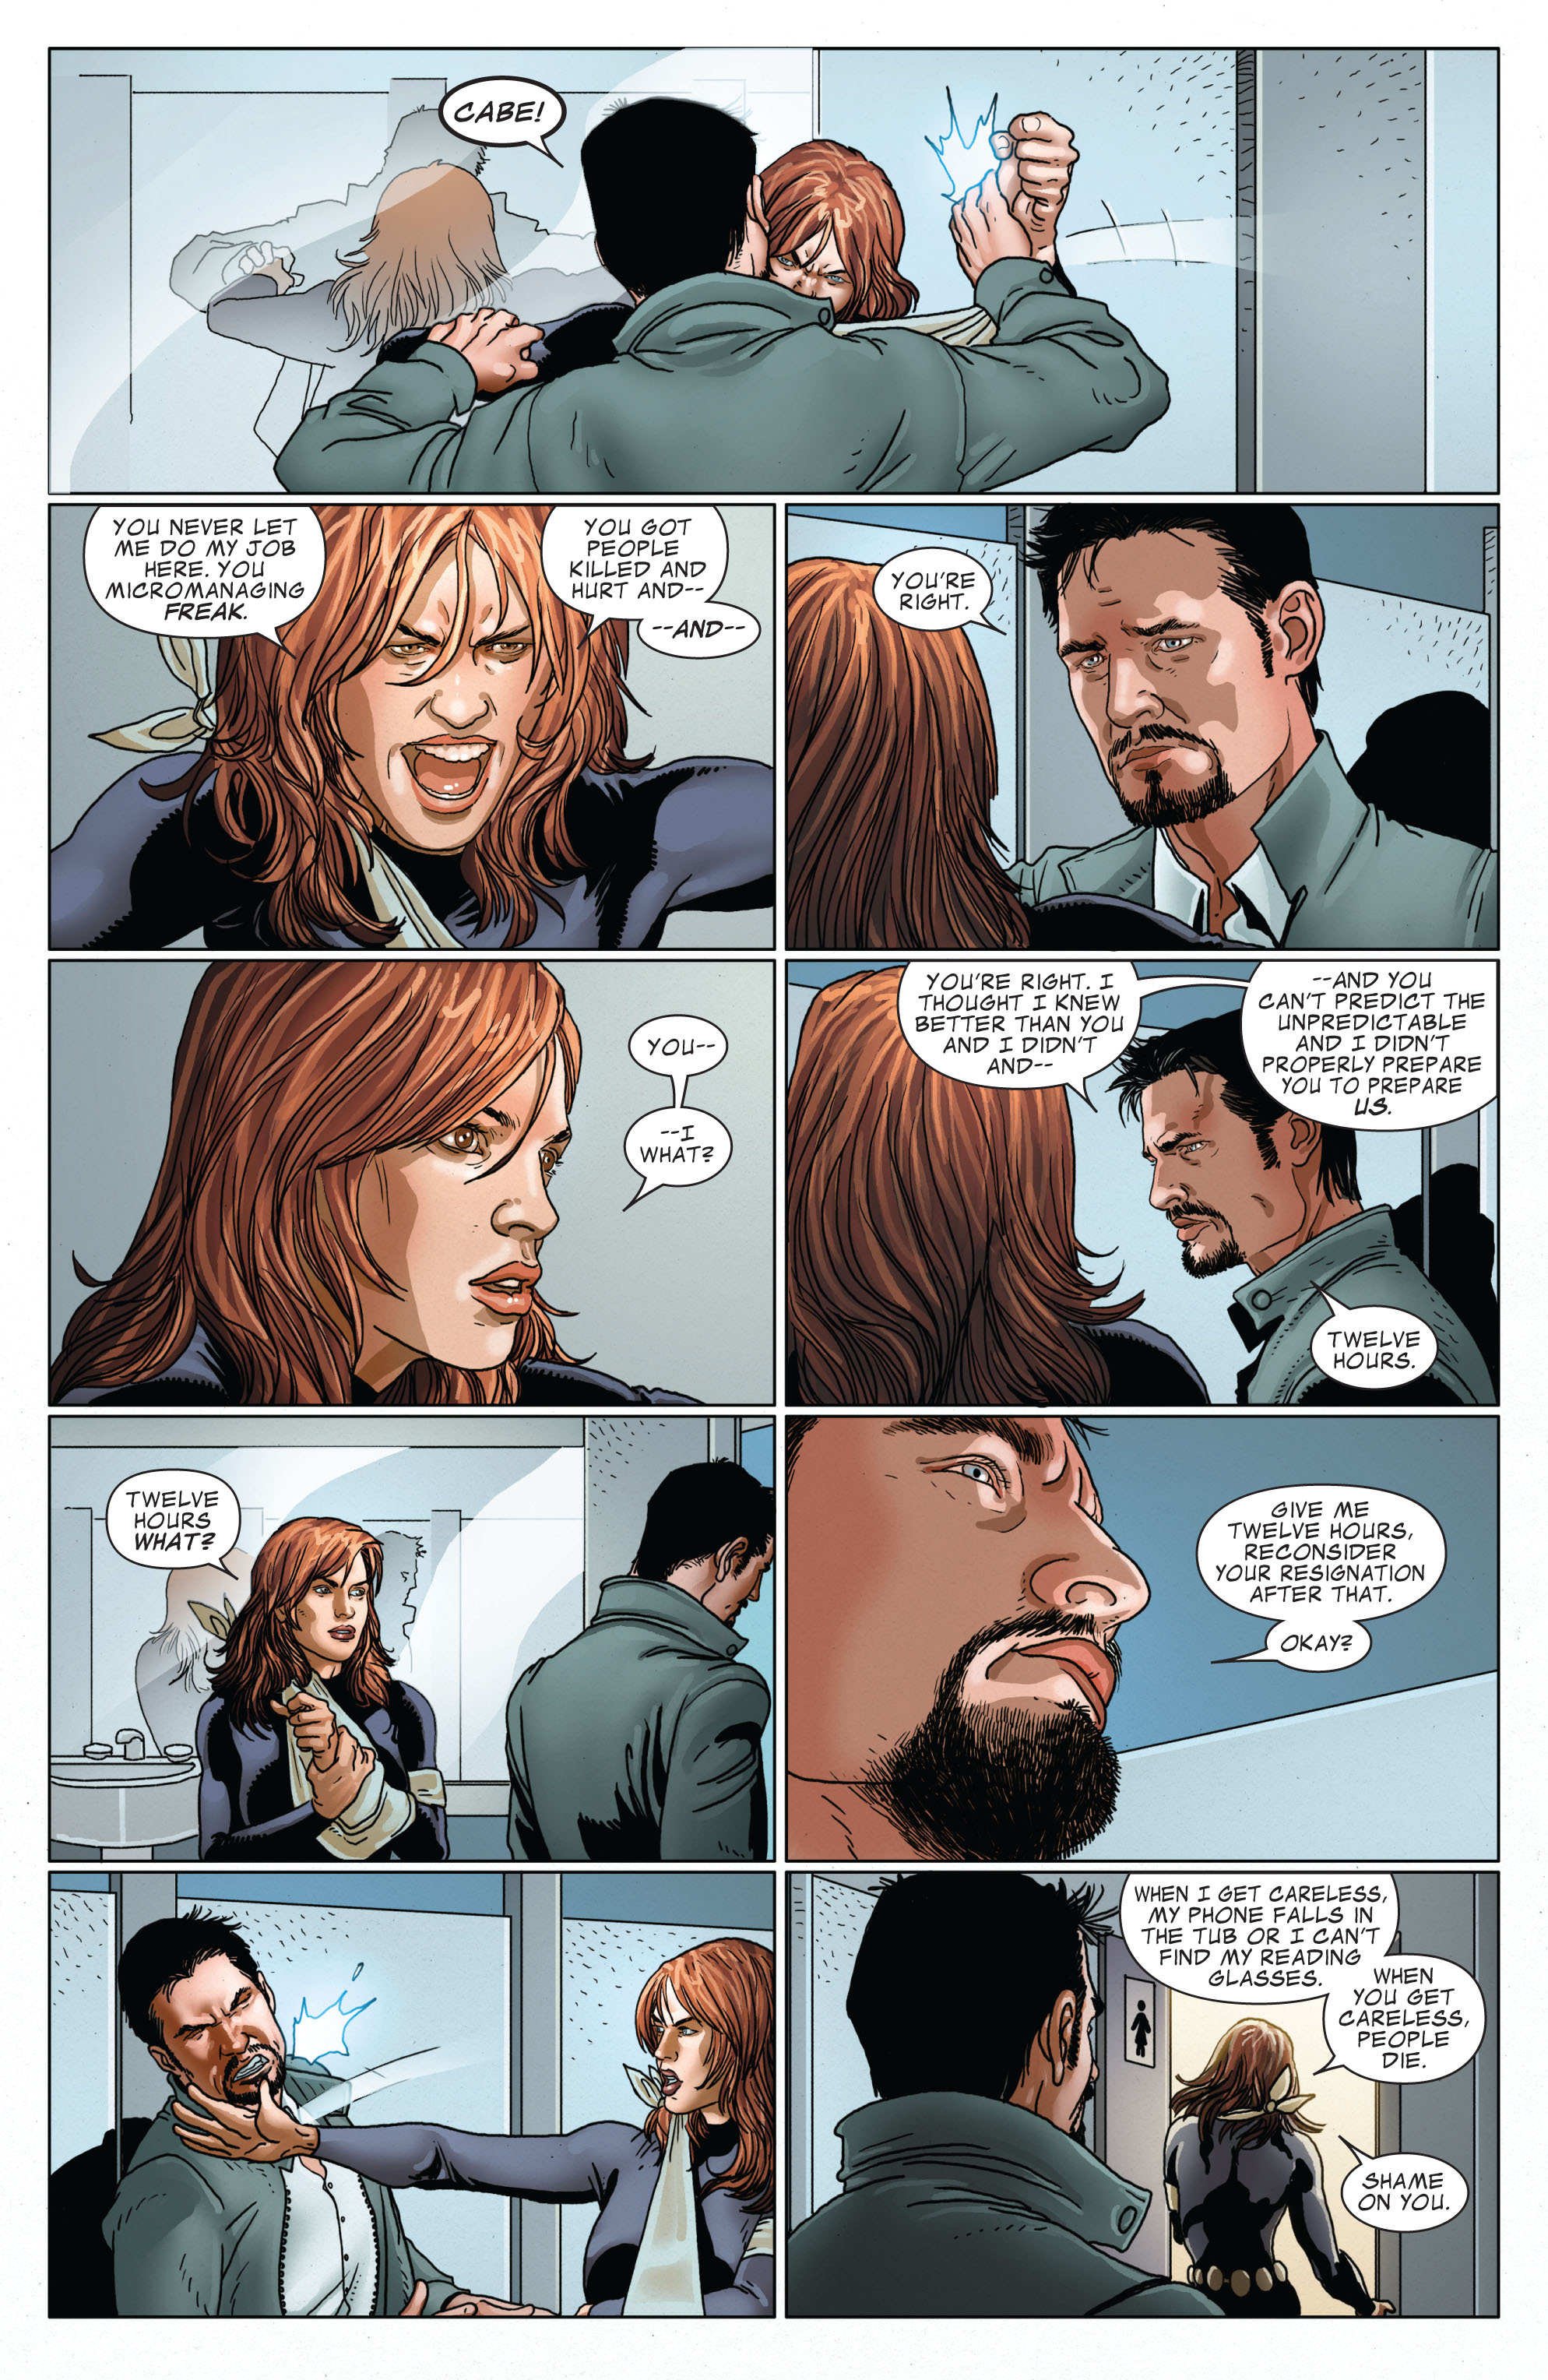 Invincible Iron Man (2008) 519 Page 9